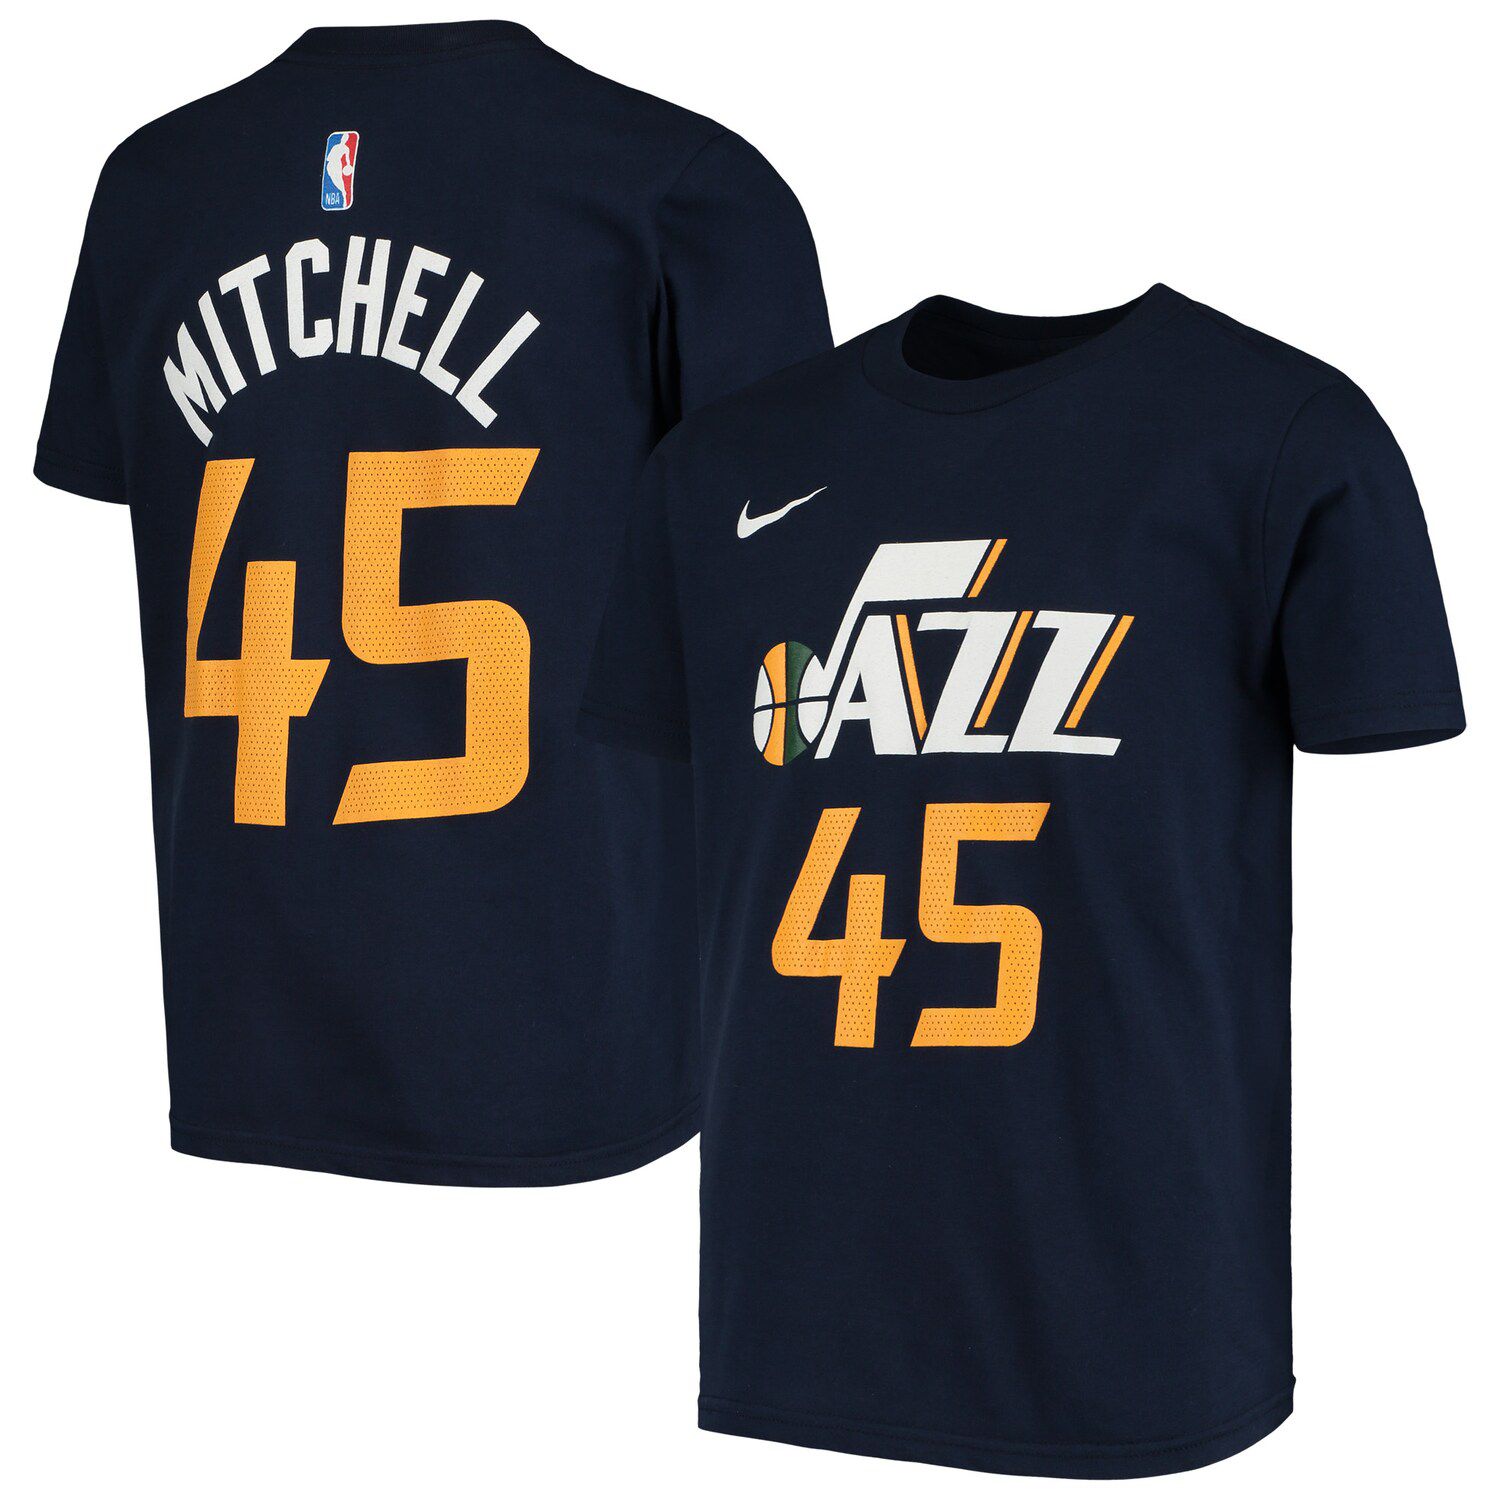 donovan mitchell youth jersey